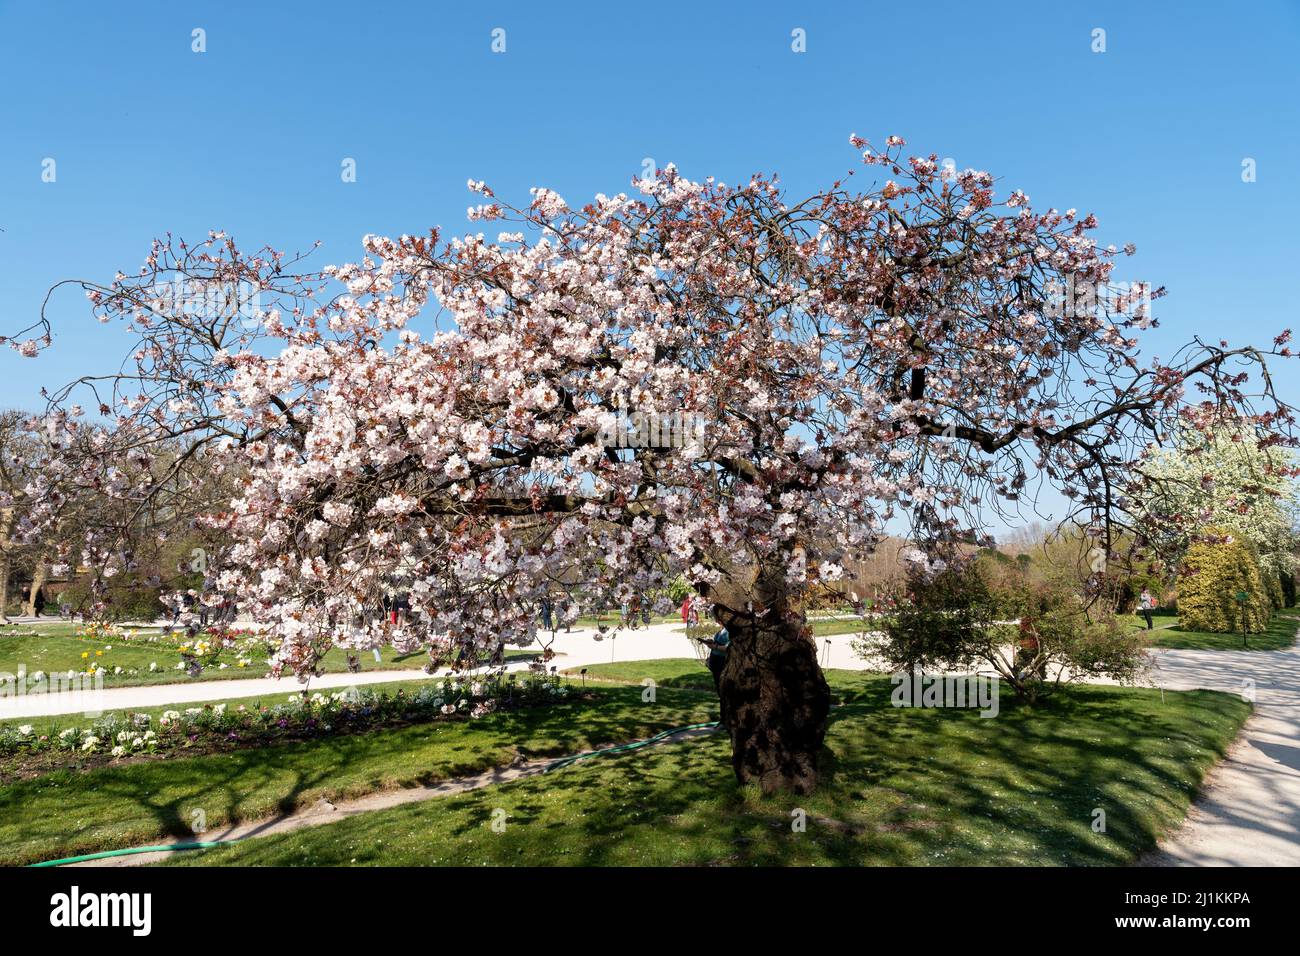 Cherry tree with pink flowers in full bloom - Paris Stock Photo